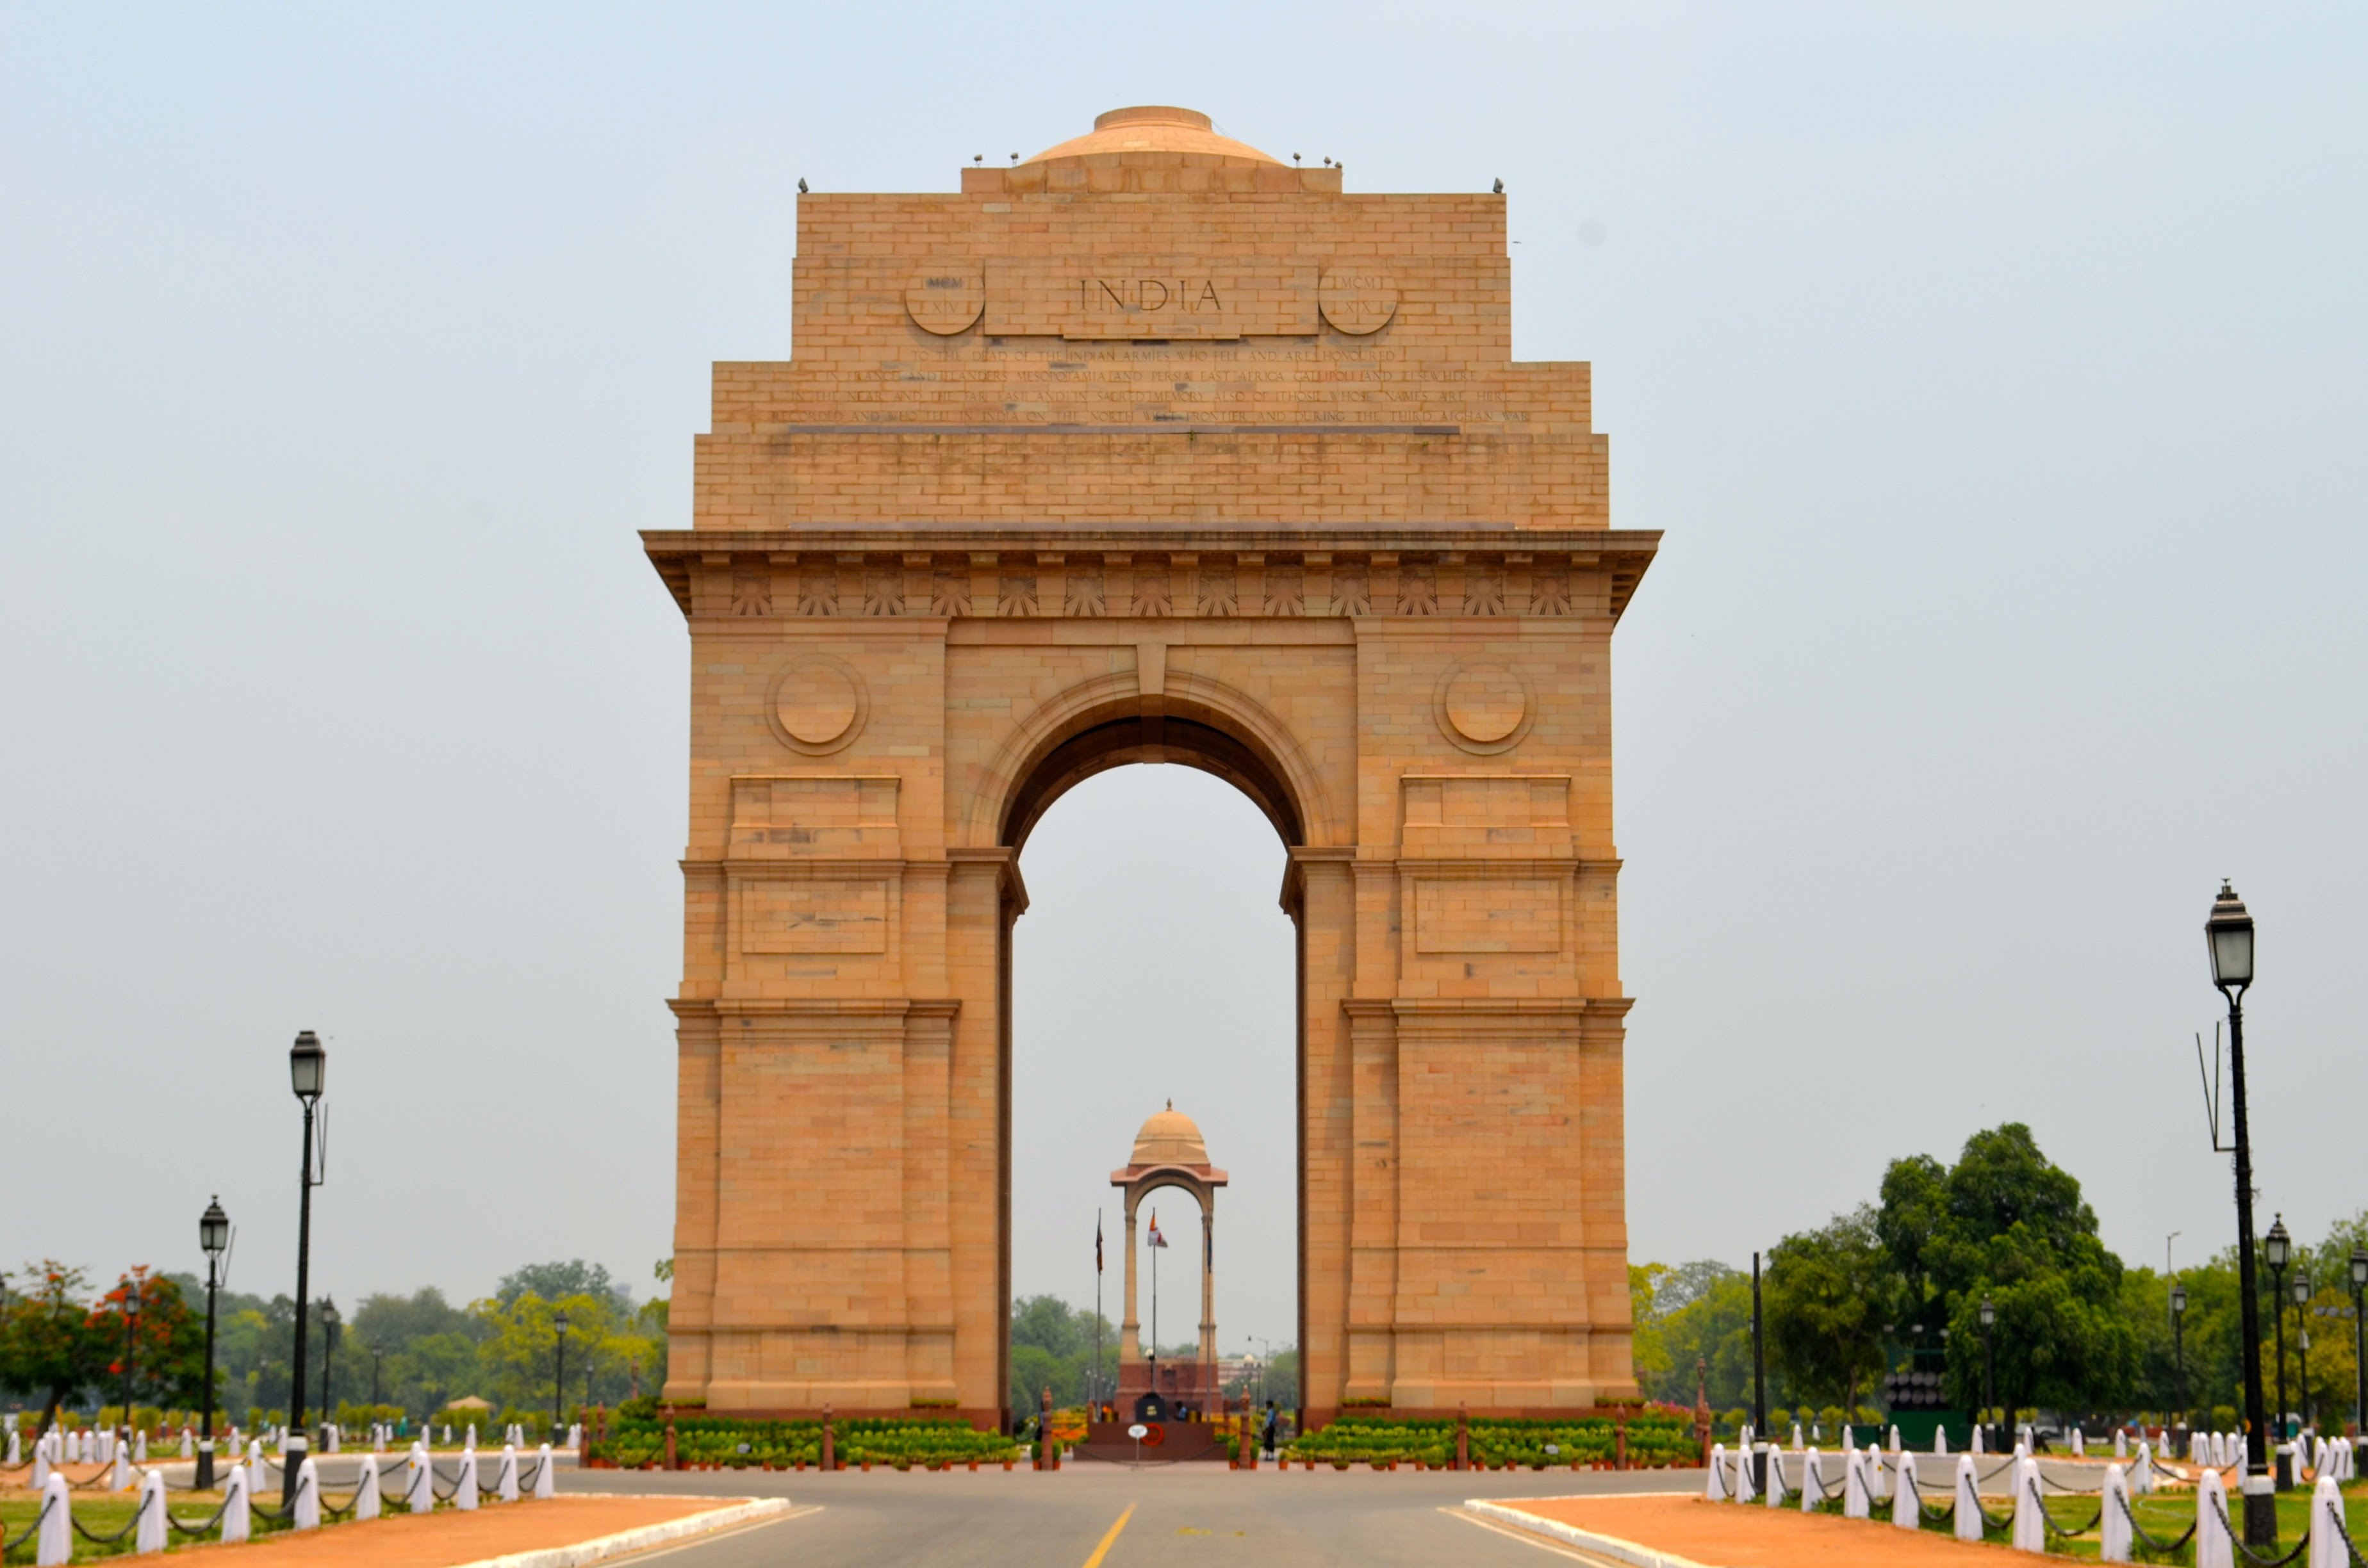 India Gate - An untold story - YouTube